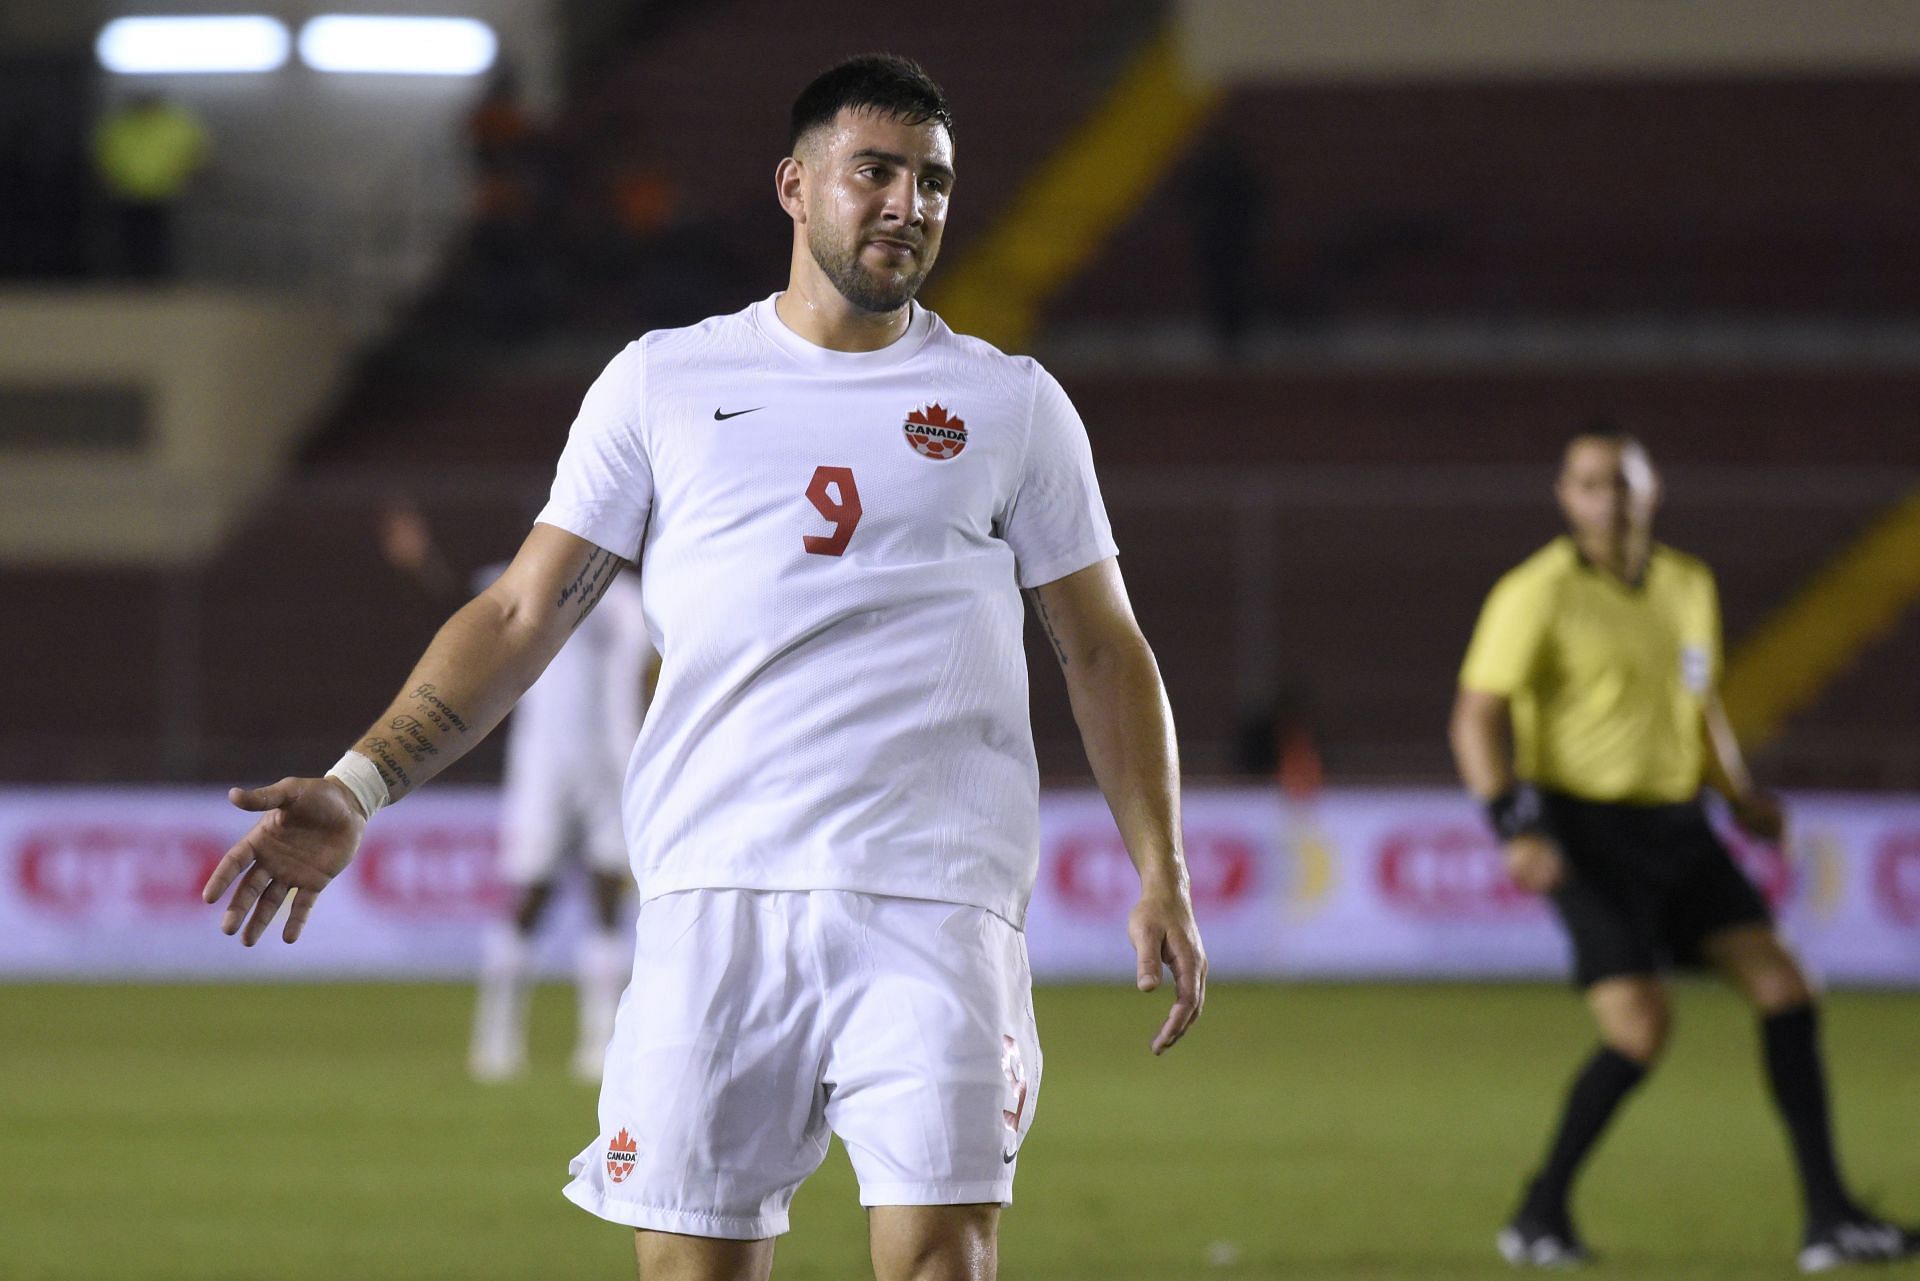 Canada face Honduras in their CONCACAF Nations League fixture on Monday